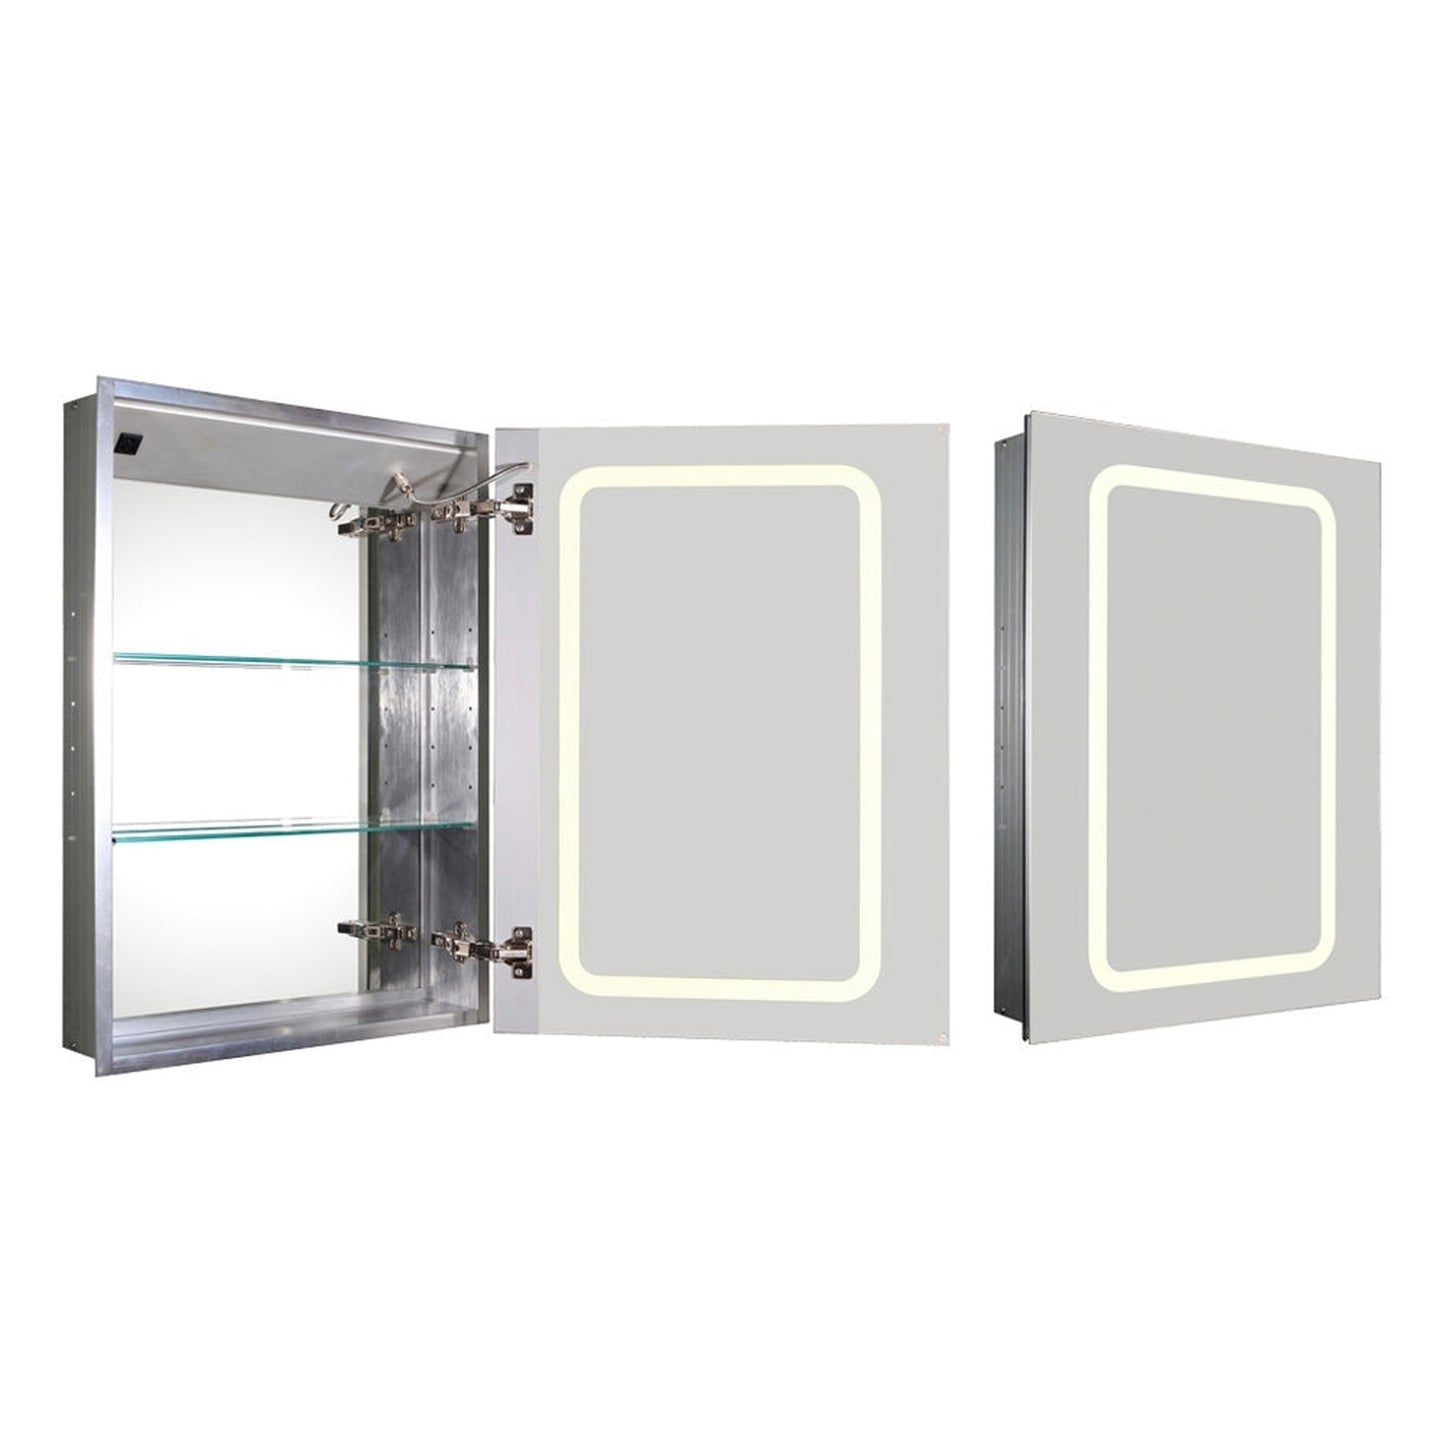 Whitehaus Medicinehaus WHKAL7055-I Recessed Single Mirrored Door Medicine Cabinet With Outlet and LED Power Dimmer for Light